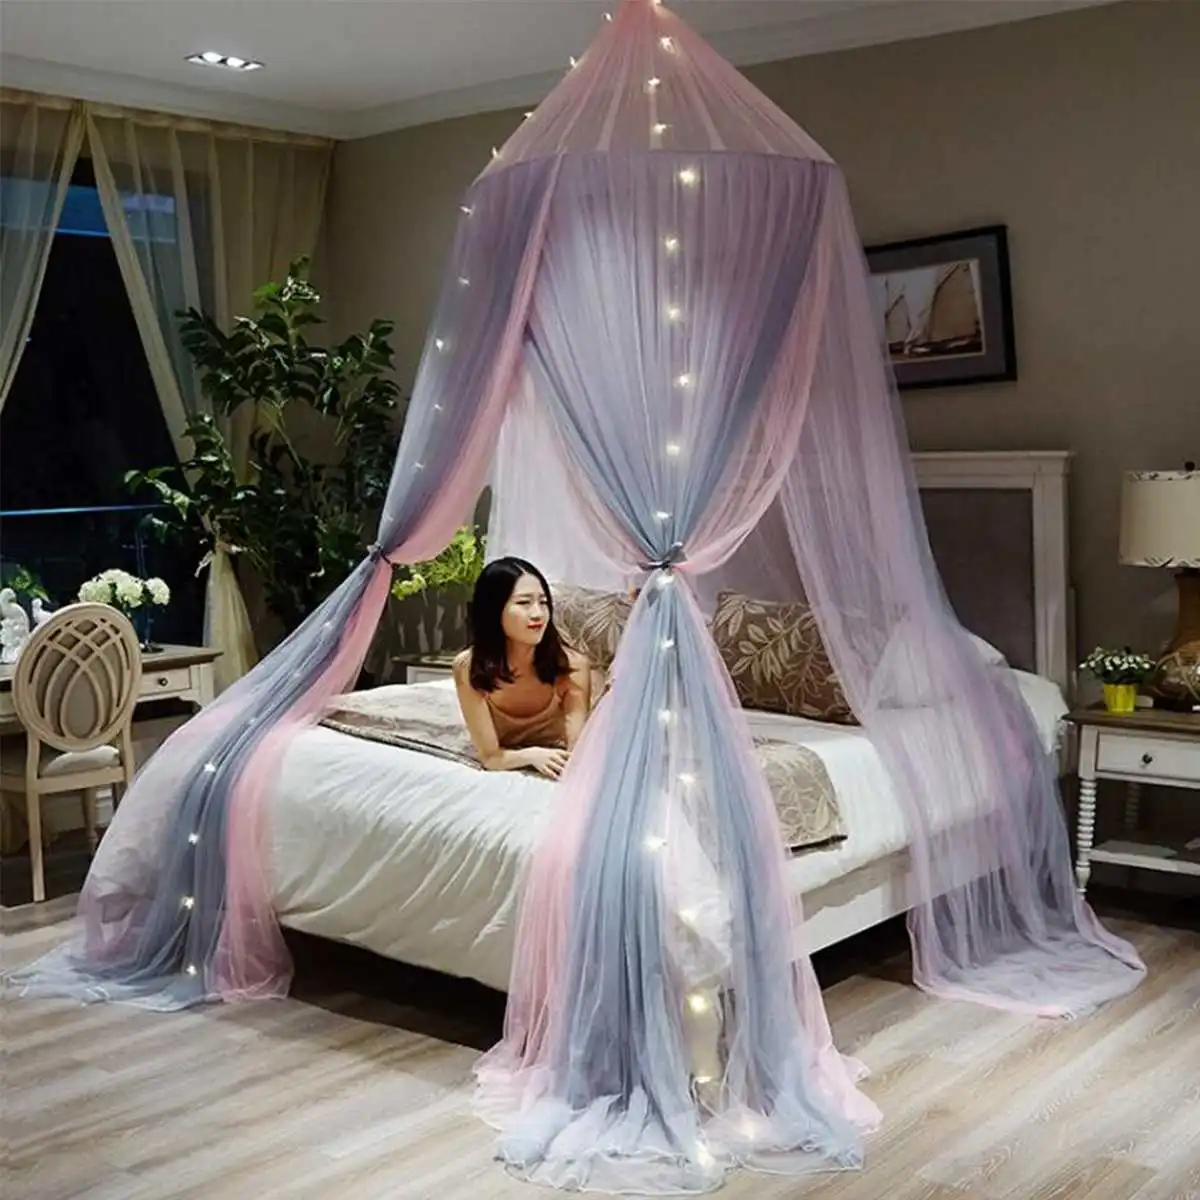 Lace LED Light Princess Dome Mosquito Net Mesh Bed Canopy Bedroom Home Decor., 